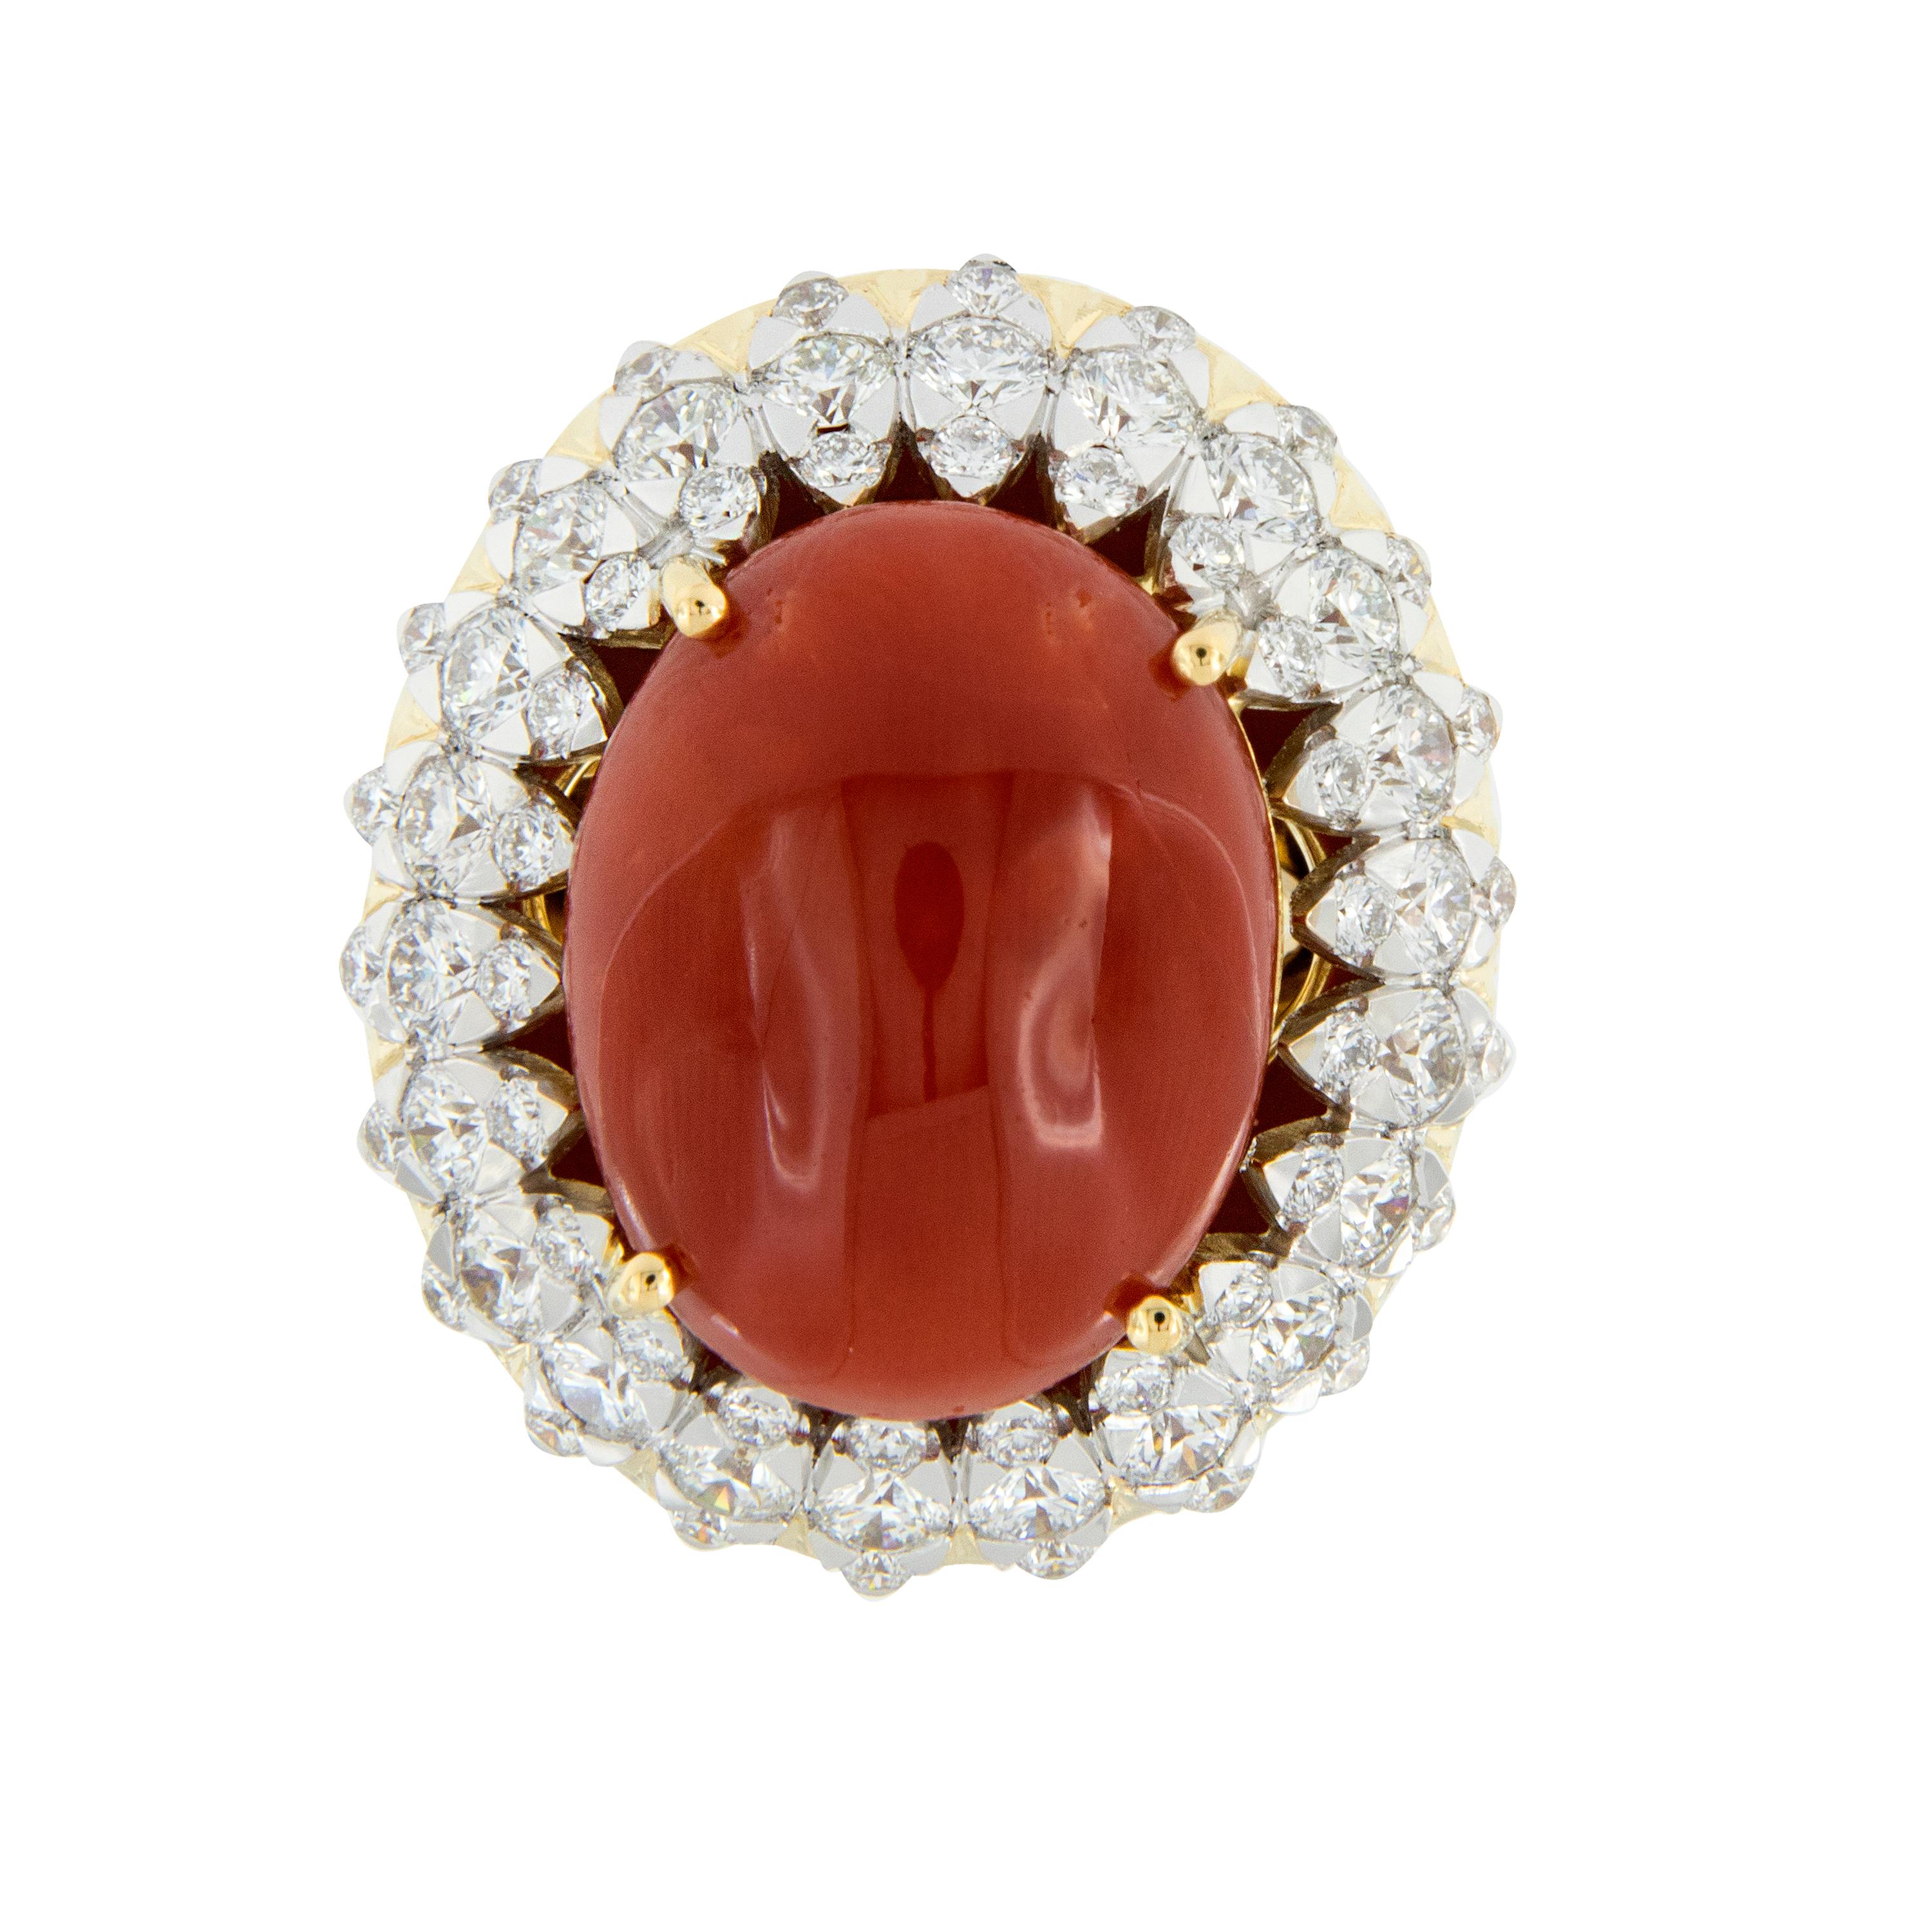 Rare & untreated, fine Mediterranean Oxblood coral is the center of this magnificent ring! Made in Italy of 18 karat yellow & white gold with oval cabochon coral = 1.9 grams & 2.11 Cttw diamonds of VS clarity & F-G color. There isn't a spot on this